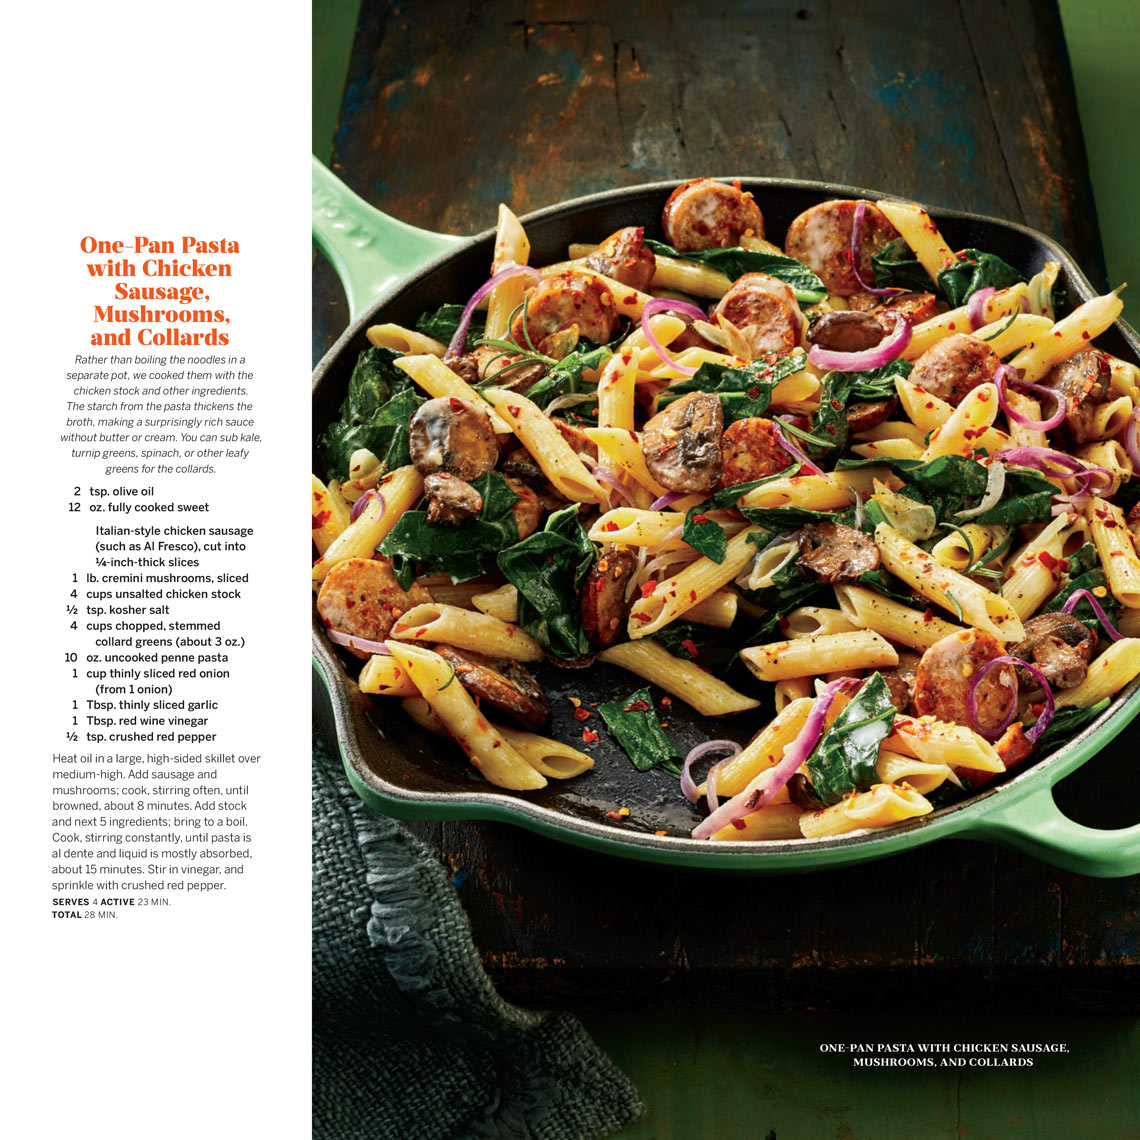 One-Pan-Pasta-With-Chicken-and-Sausage-Mushrooms-and-Collards-copy